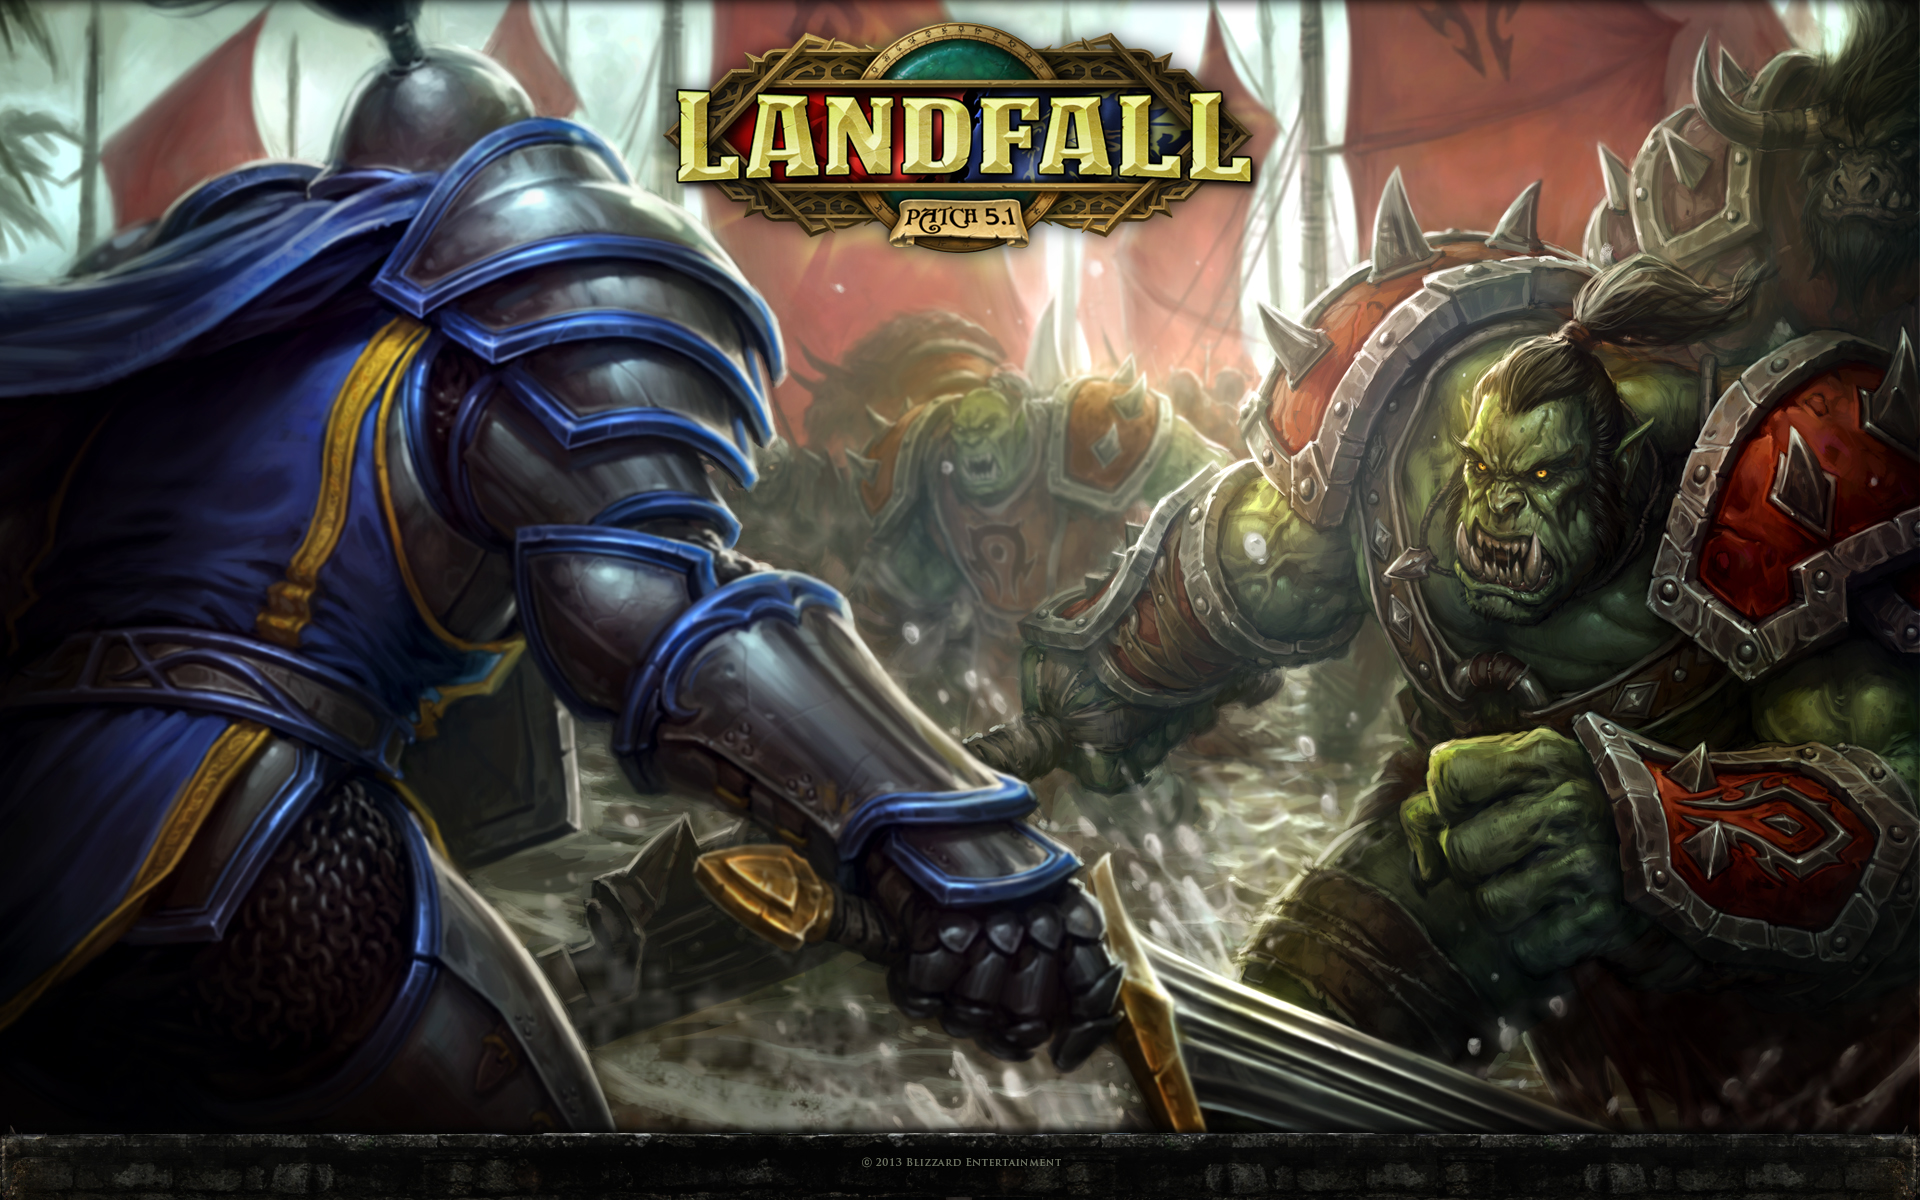 World Of Warcraft Video Games World Of Warcraft Mists Of Pandaria Orcs Horde Alliance Video Game Art 1920x1200